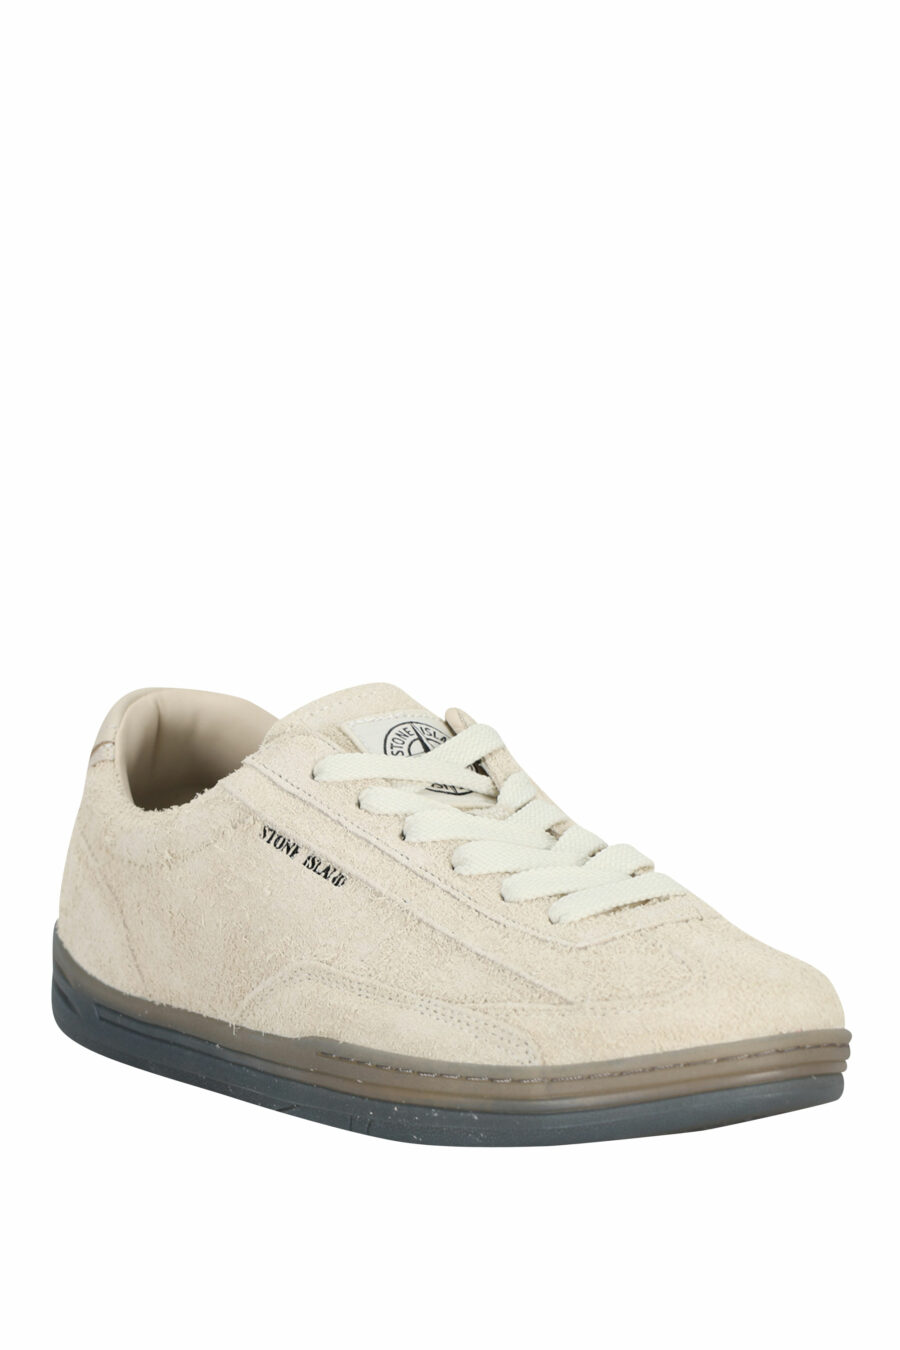 Beige trainers with minilogo and grey sole - 8052572915505 1